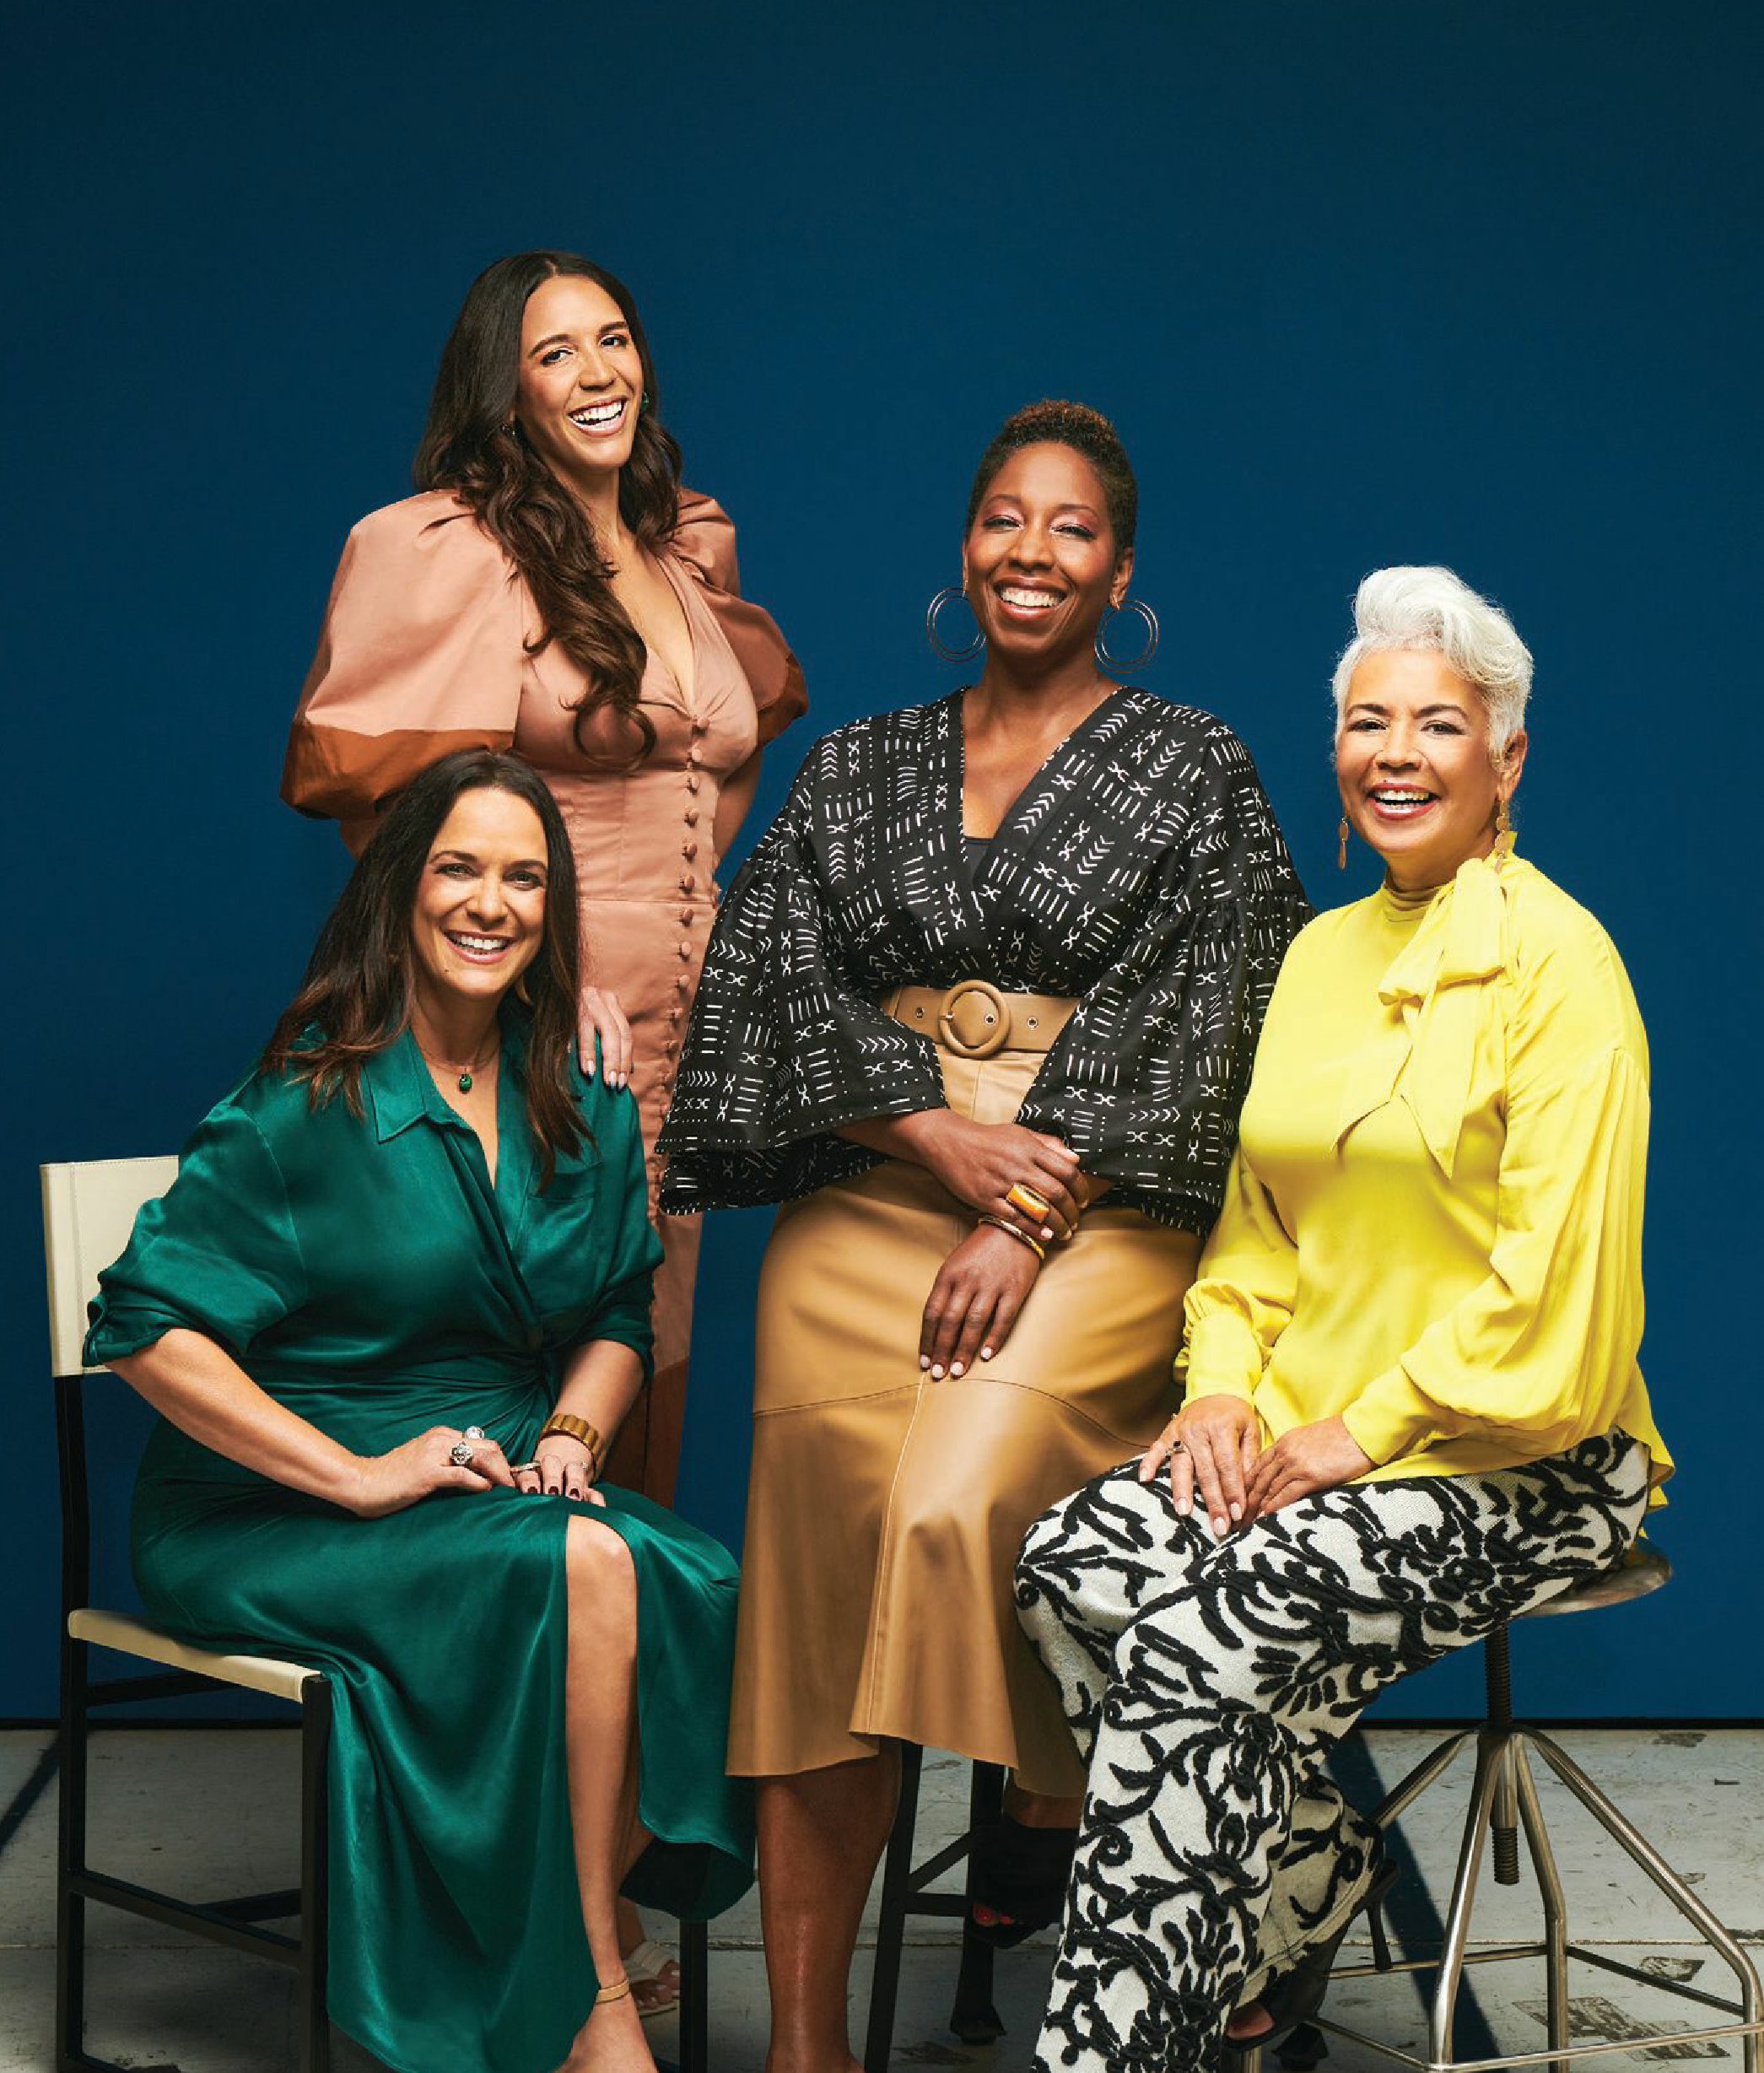 The Pottery Barn collaboration designers, including mother-daughter duo Penny Francis and Casi St. Julian, Malene Barnett and Lisa Turner. PHOTO BY KELLY MARSHALL